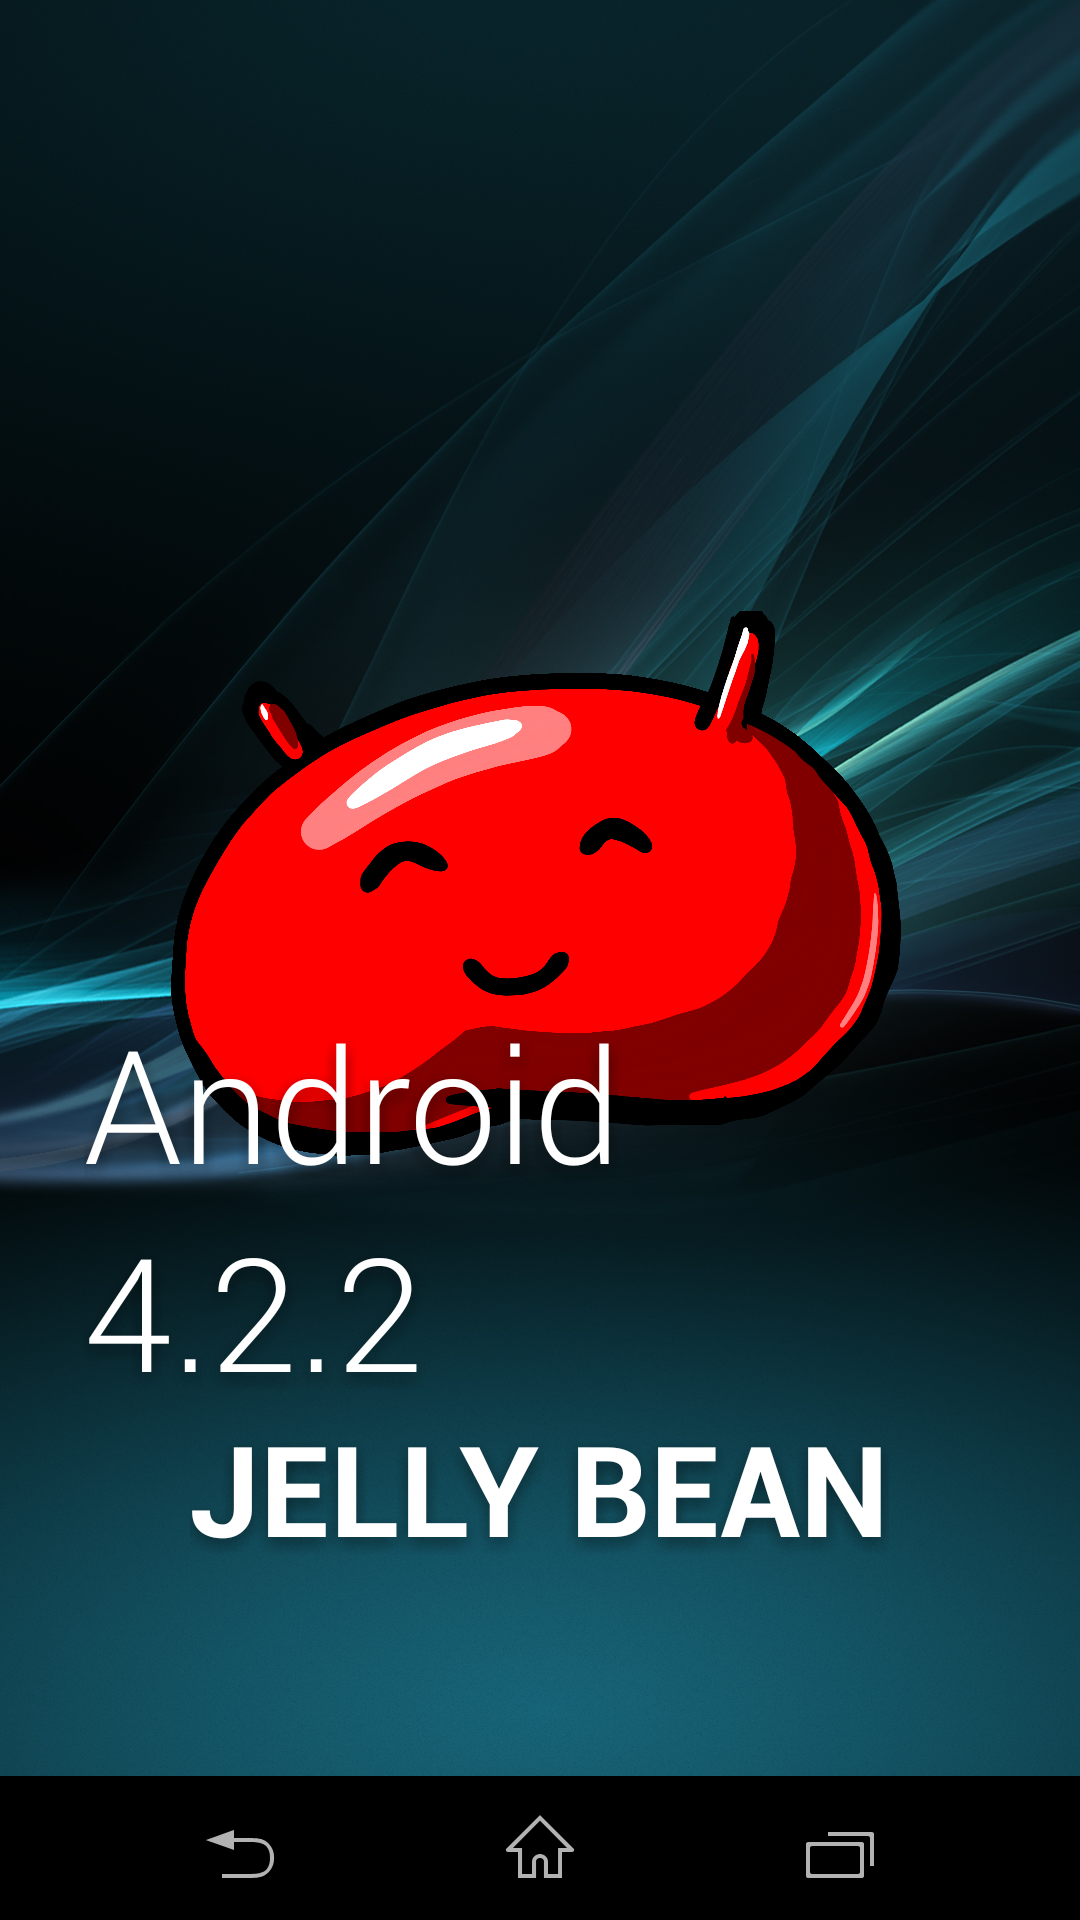 Обновление xperia. Android 4.2.2 Jelly Bean. Android 4.3 Jelly Bean. Android 4 Jelly Bean. Android 4.2 Jelly Bean.